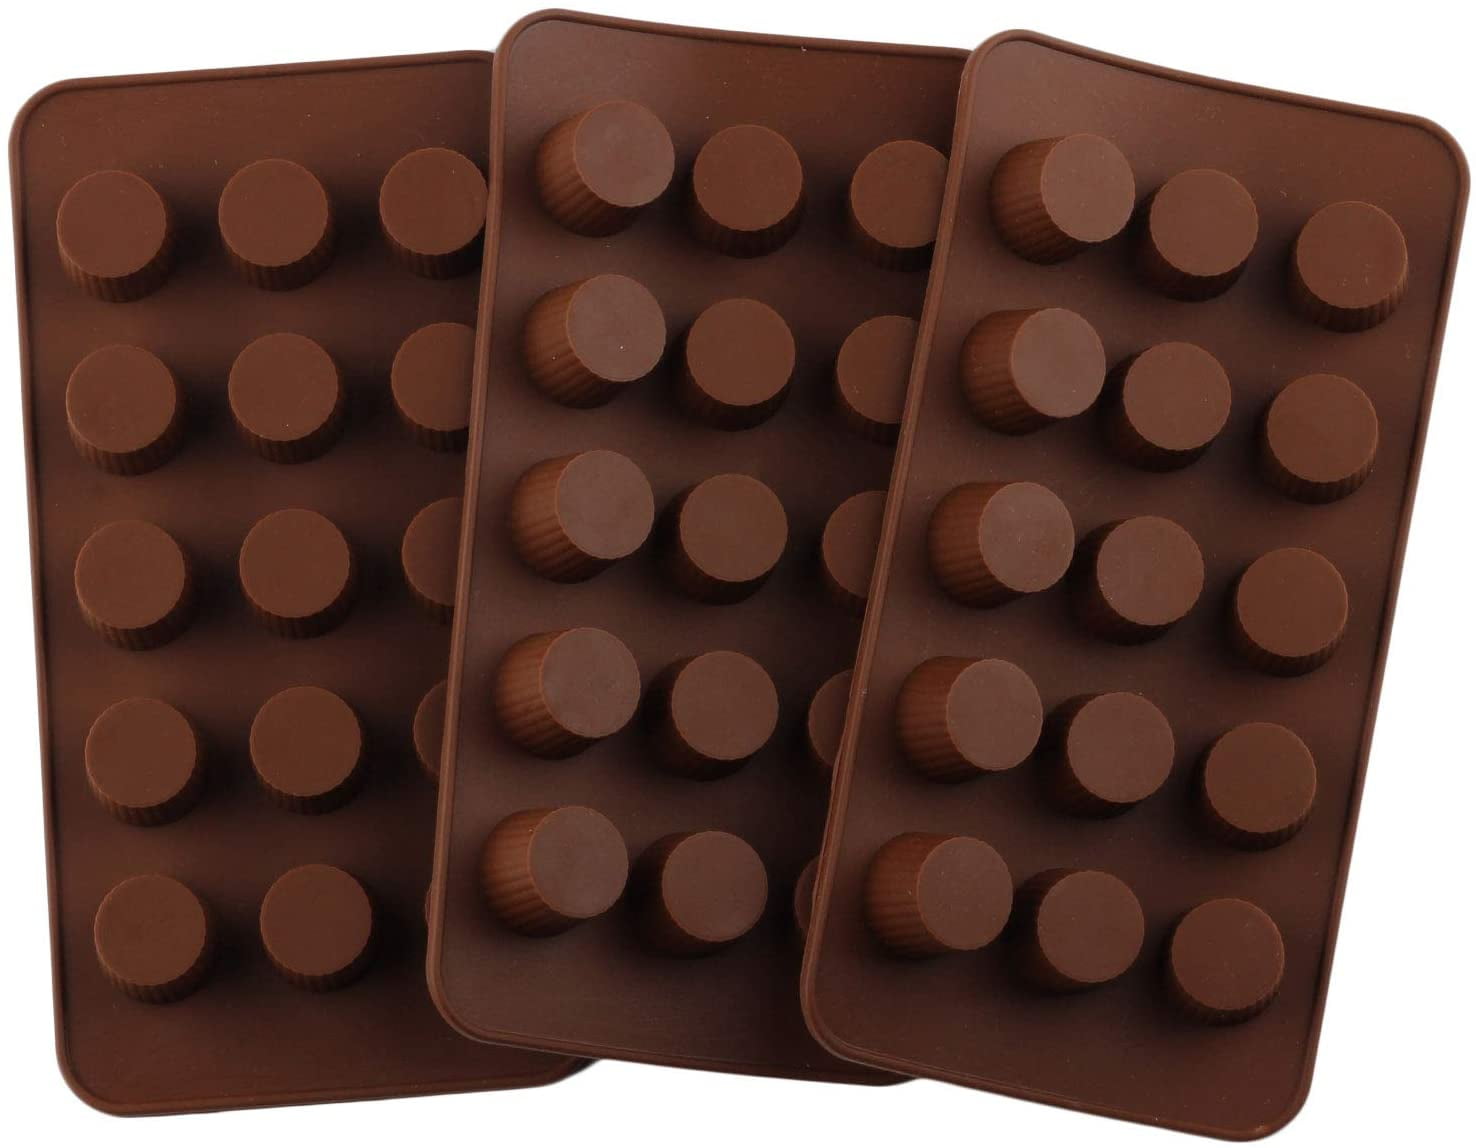 QDCFY Chocolate Molds (eight Leaves with cover),Chocolate Candy Silicone Mold 8 Slots with Lid for Baking, Ice Cubes, and Dropping Gelatin Molds, High and